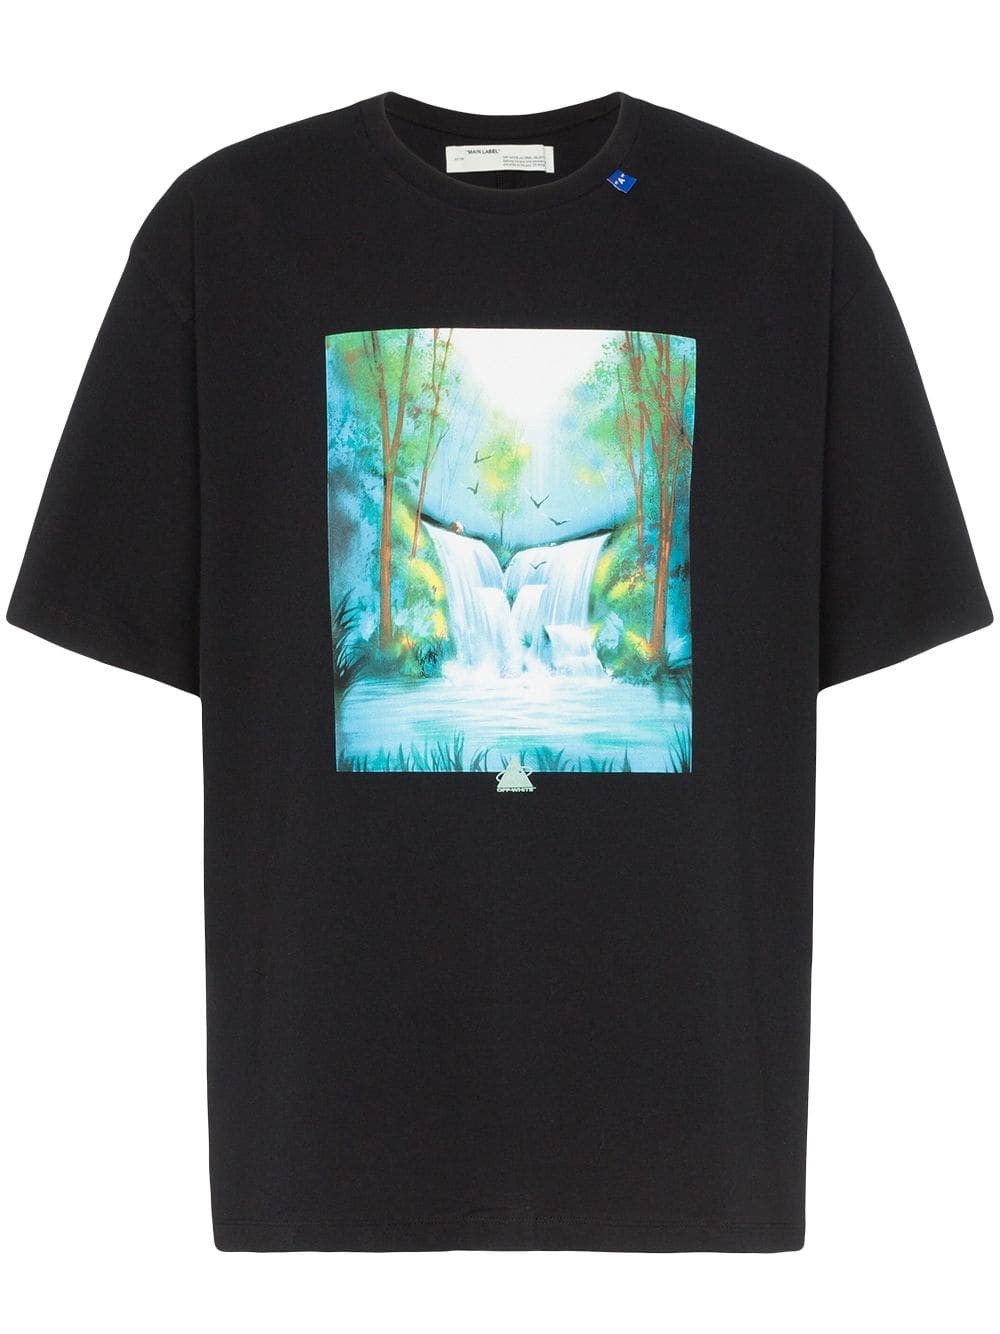 off-white T SHIRT WATERFALL available on montiboutique.com - 29016